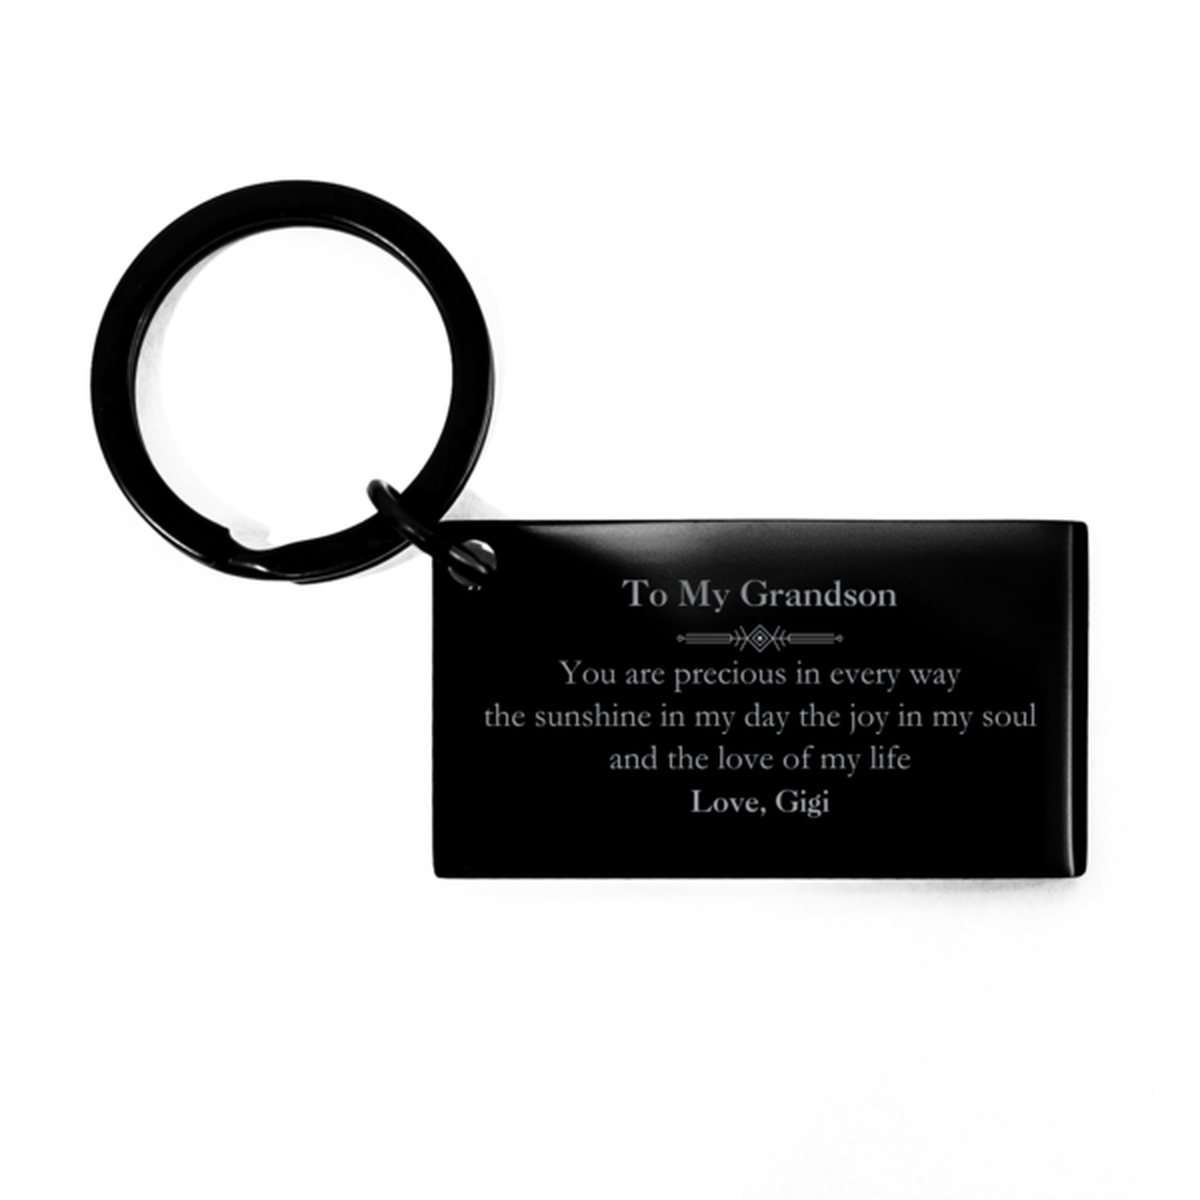 Graduation Gifts for Grandson Keychain Present from Gigi, Christmas Grandson Birthday Gifts Grandson You are precious in every way the sunshine in my day. Love, Gigi